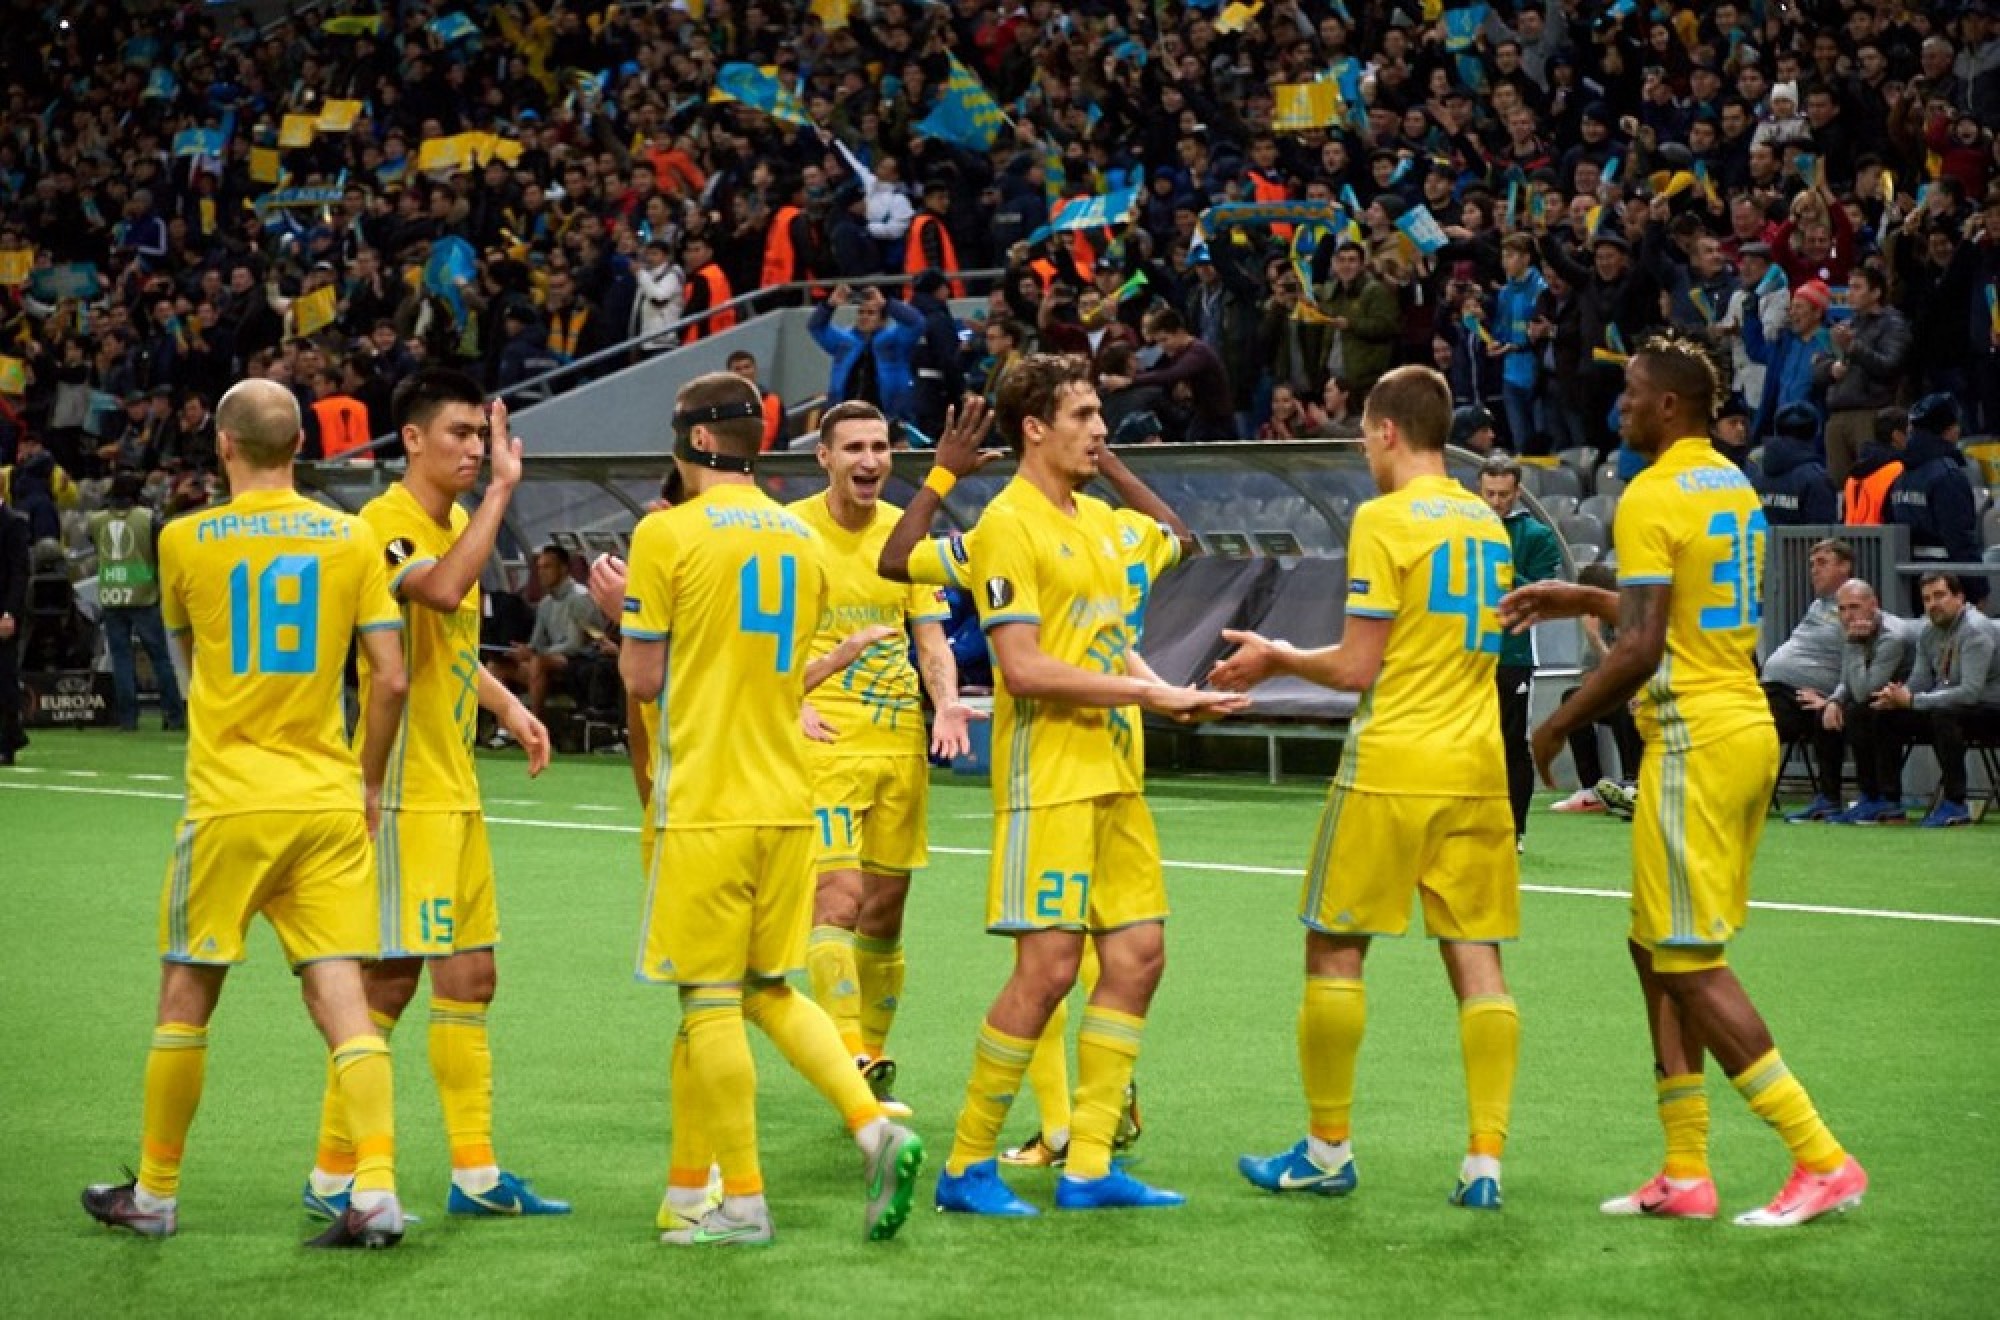 FC Astana players arrived in Israel to play with Maccabi